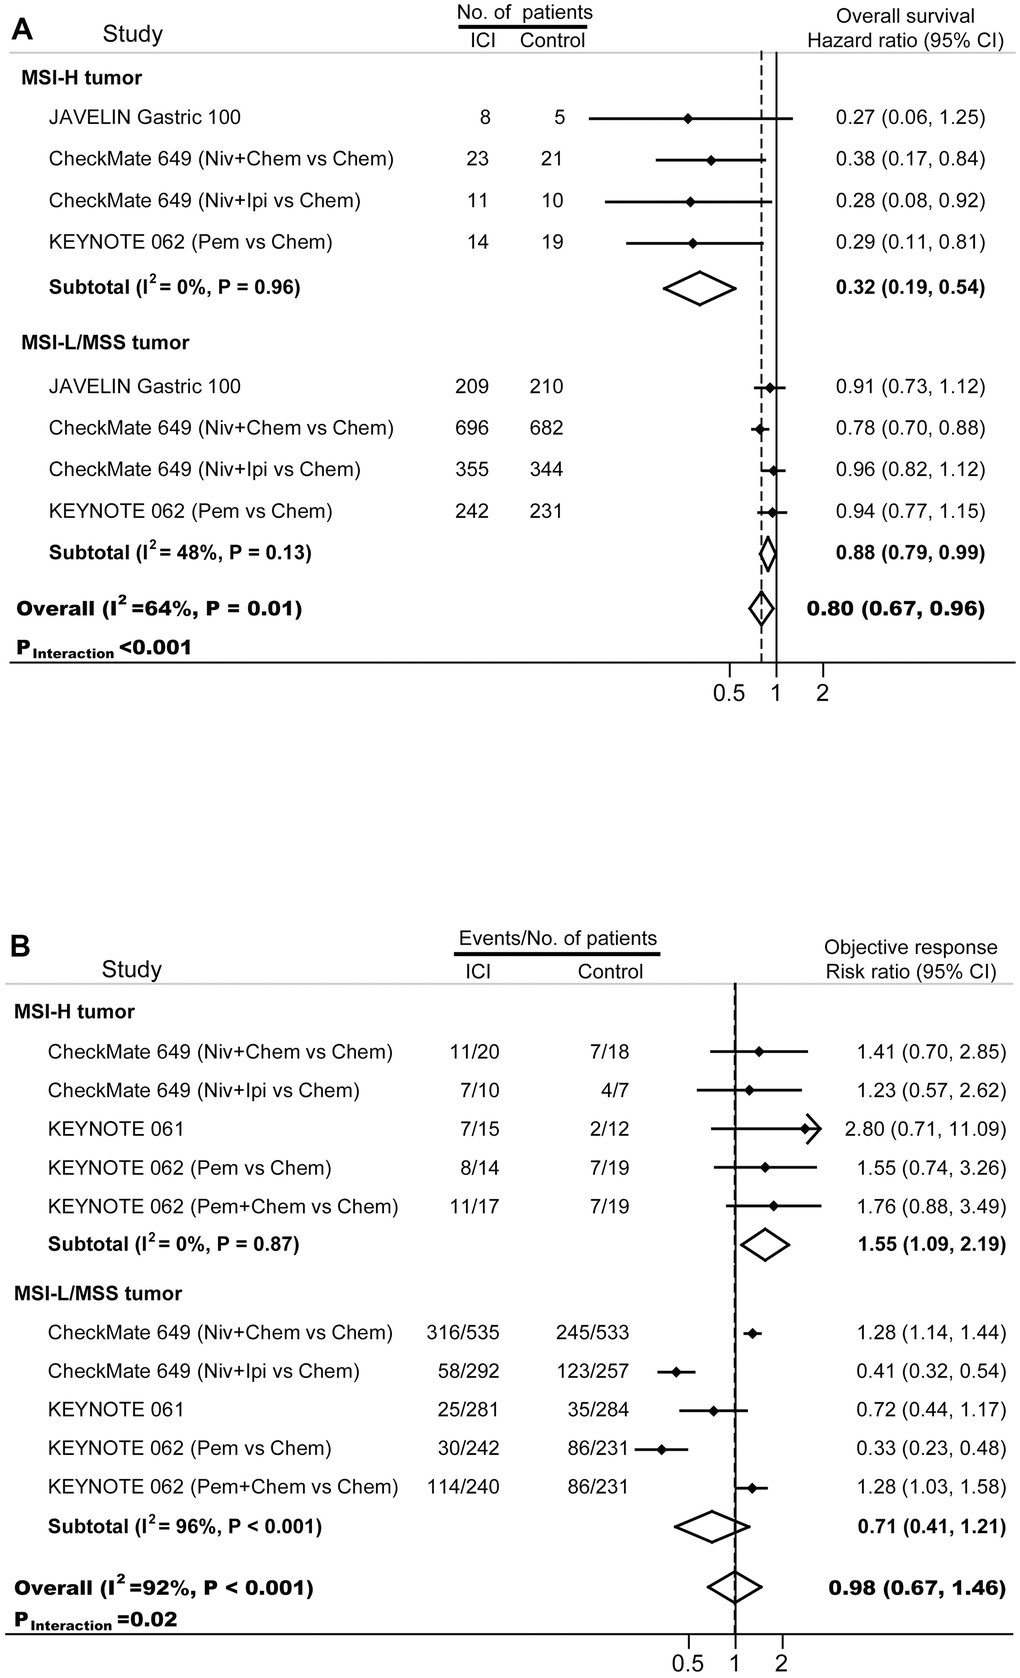 Forest plots of (A) hazard ratios for overall survival, and (B) risk ratios for objective response in gastric cancer patients treated with immunotherapy. Chem, chemotherapy; ICI, immune checkpoint inhibitor; Ipi, ipilimumab; MSI-H, microsatellite instability-high; MSI-L, microsatellite instability-low; MSS, microsatellite stable; Niv, nivolumab; Pem, pembrolizumab.